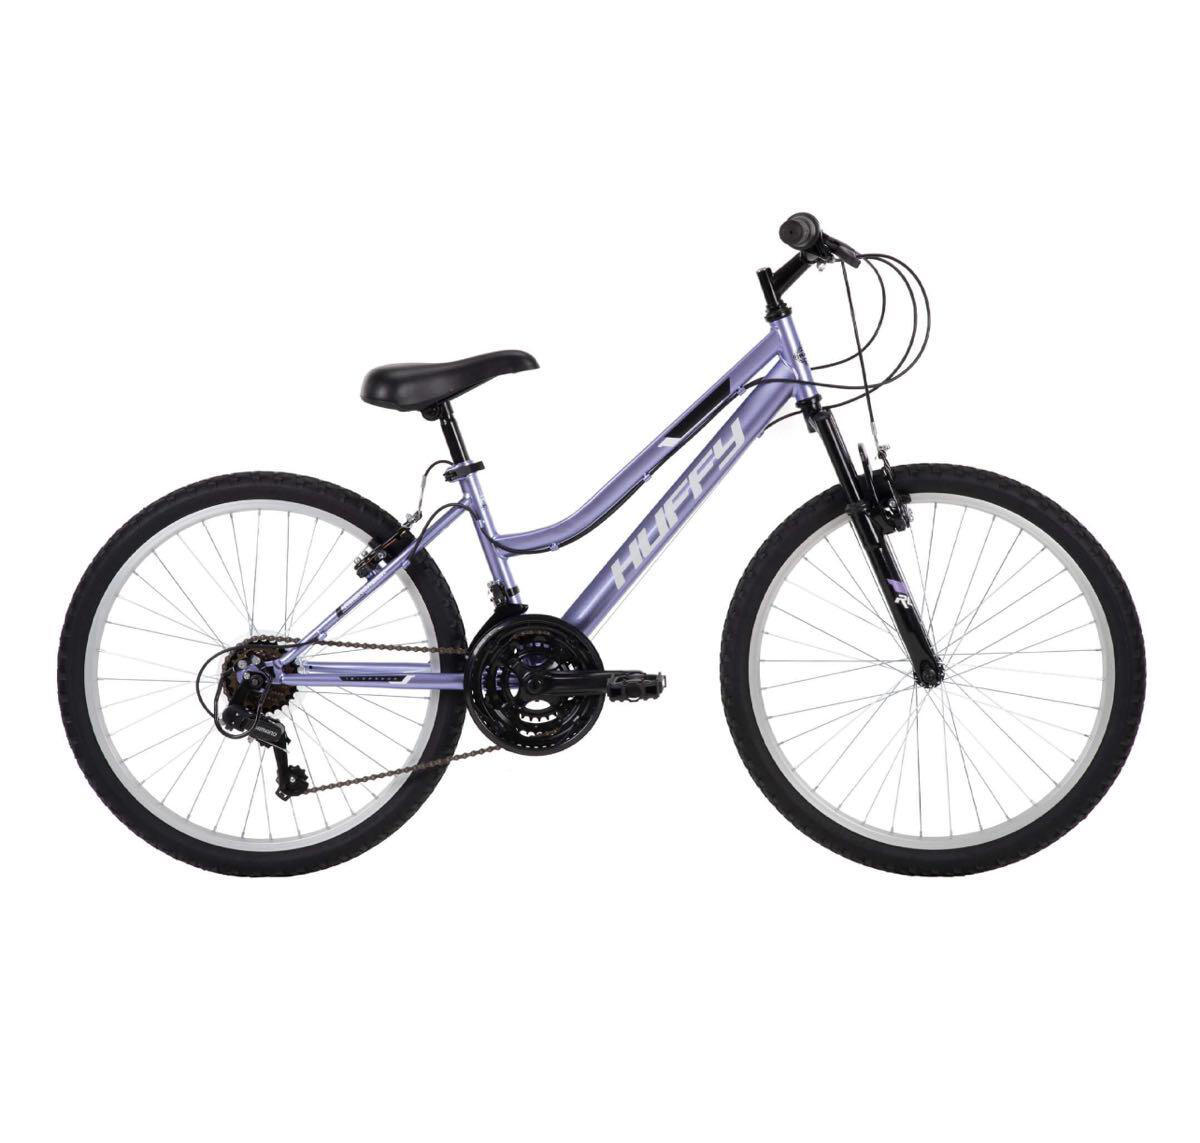 So My Daughter’s Bike Was Stolen This Morning Off Our Balcony This Morning Sometime Between The